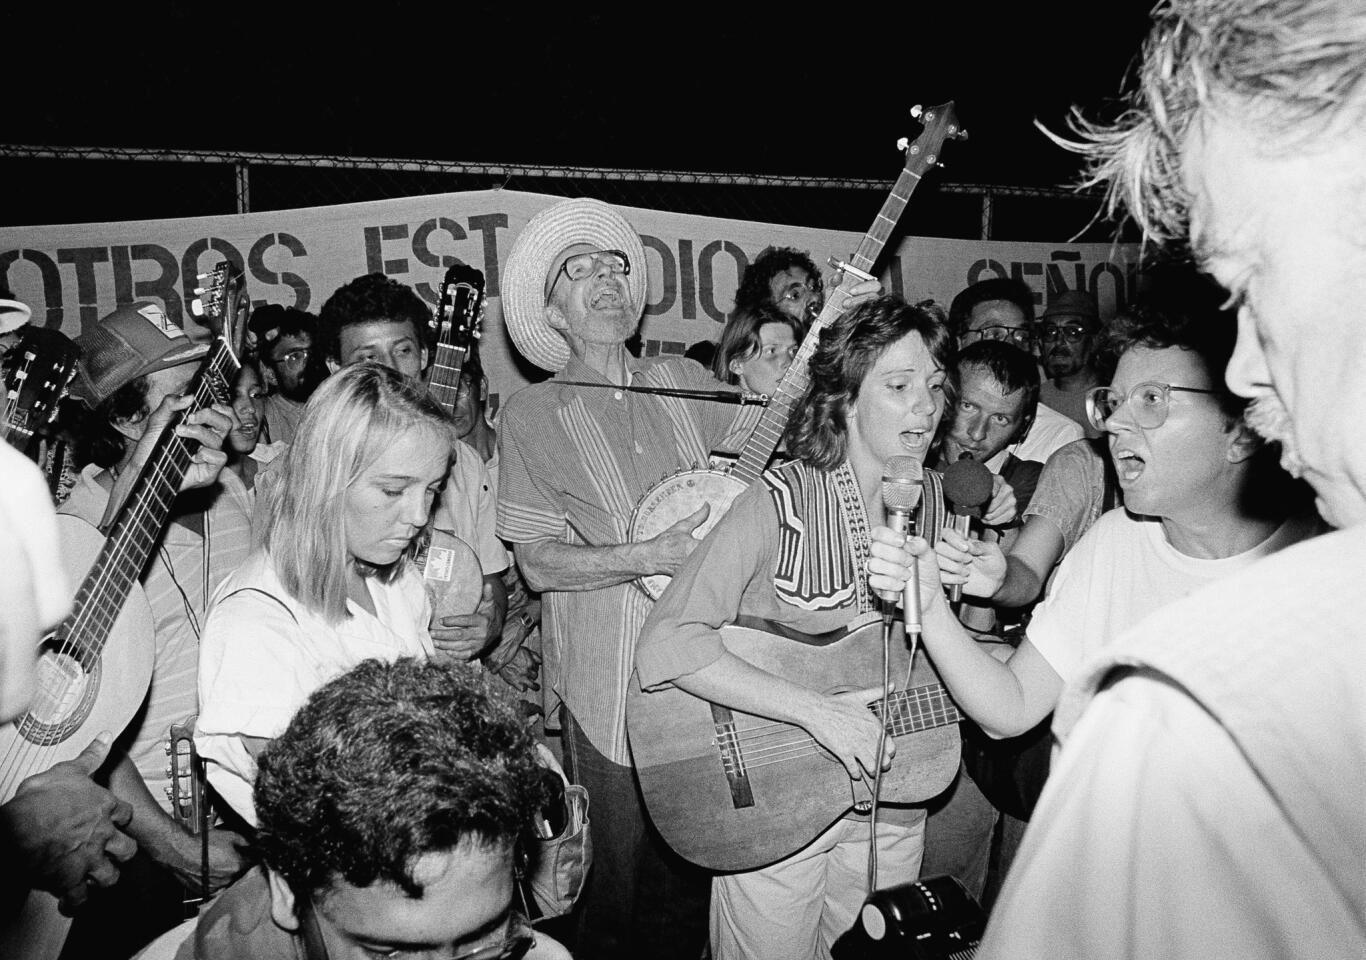 Seeger joins in a song at a 1988 rally outside the U.S. Embassy in Managua, Nicaragua. The gathering was to protest U.S. aid going to the Nicaraguan Contra rebels.